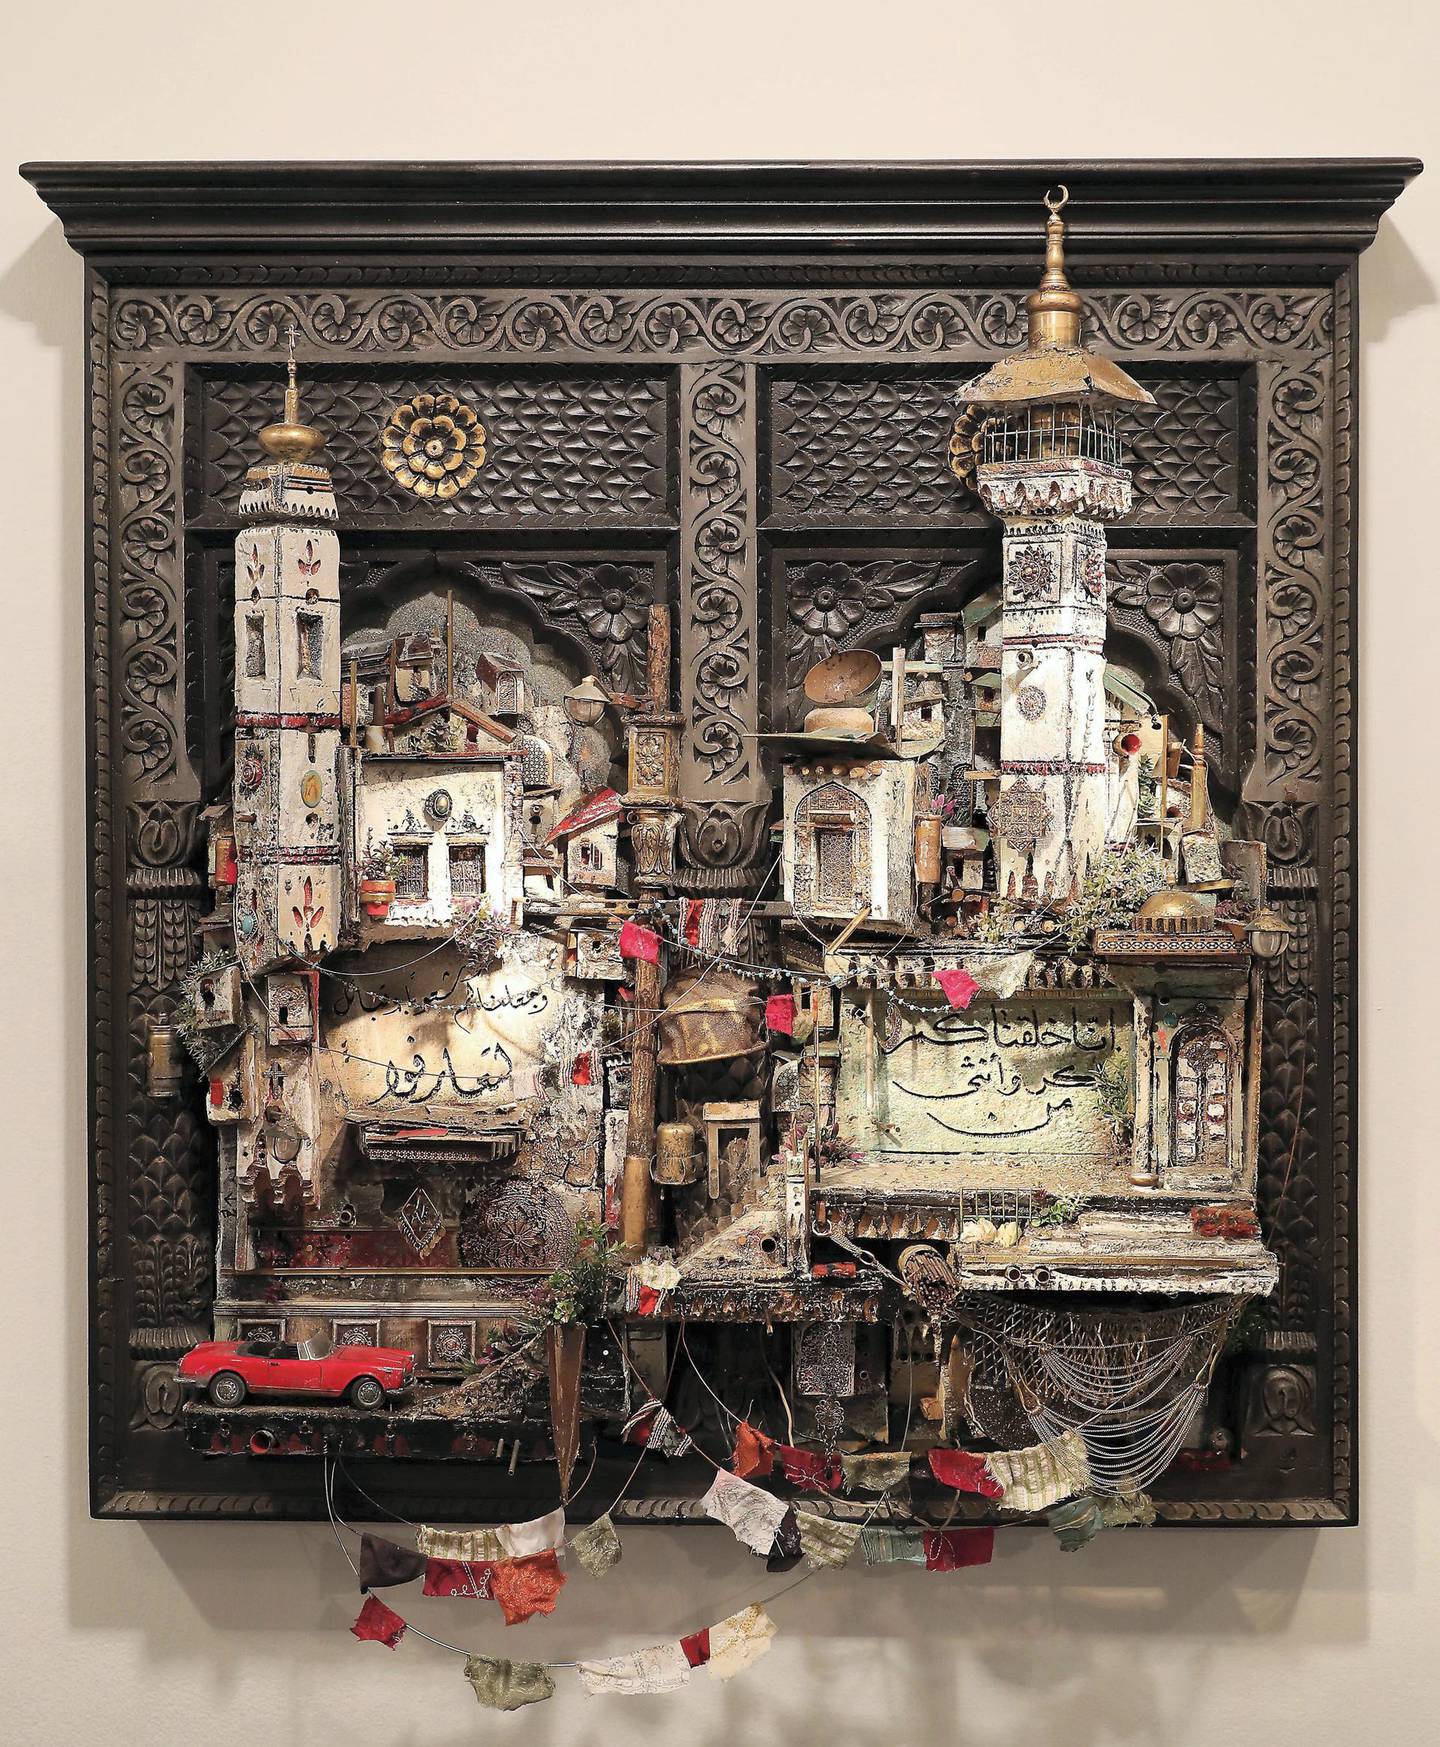 SHARJAH, UNITED ARAB EMIRATES, Dec 18 – 2019 :- Miniature art work titled “Journeys from An Absent Present to A Lost Past”  by Mohamad Hafez on display at the Sharjah Art Museum in Sharjah. He made miniature models of Syria’s ruined buildings from his childhood memories in his country of origin, Syria. (Pawan Singh / The National) For Arts & Culture/Online/Instagram. Story by Alexandra Chaves